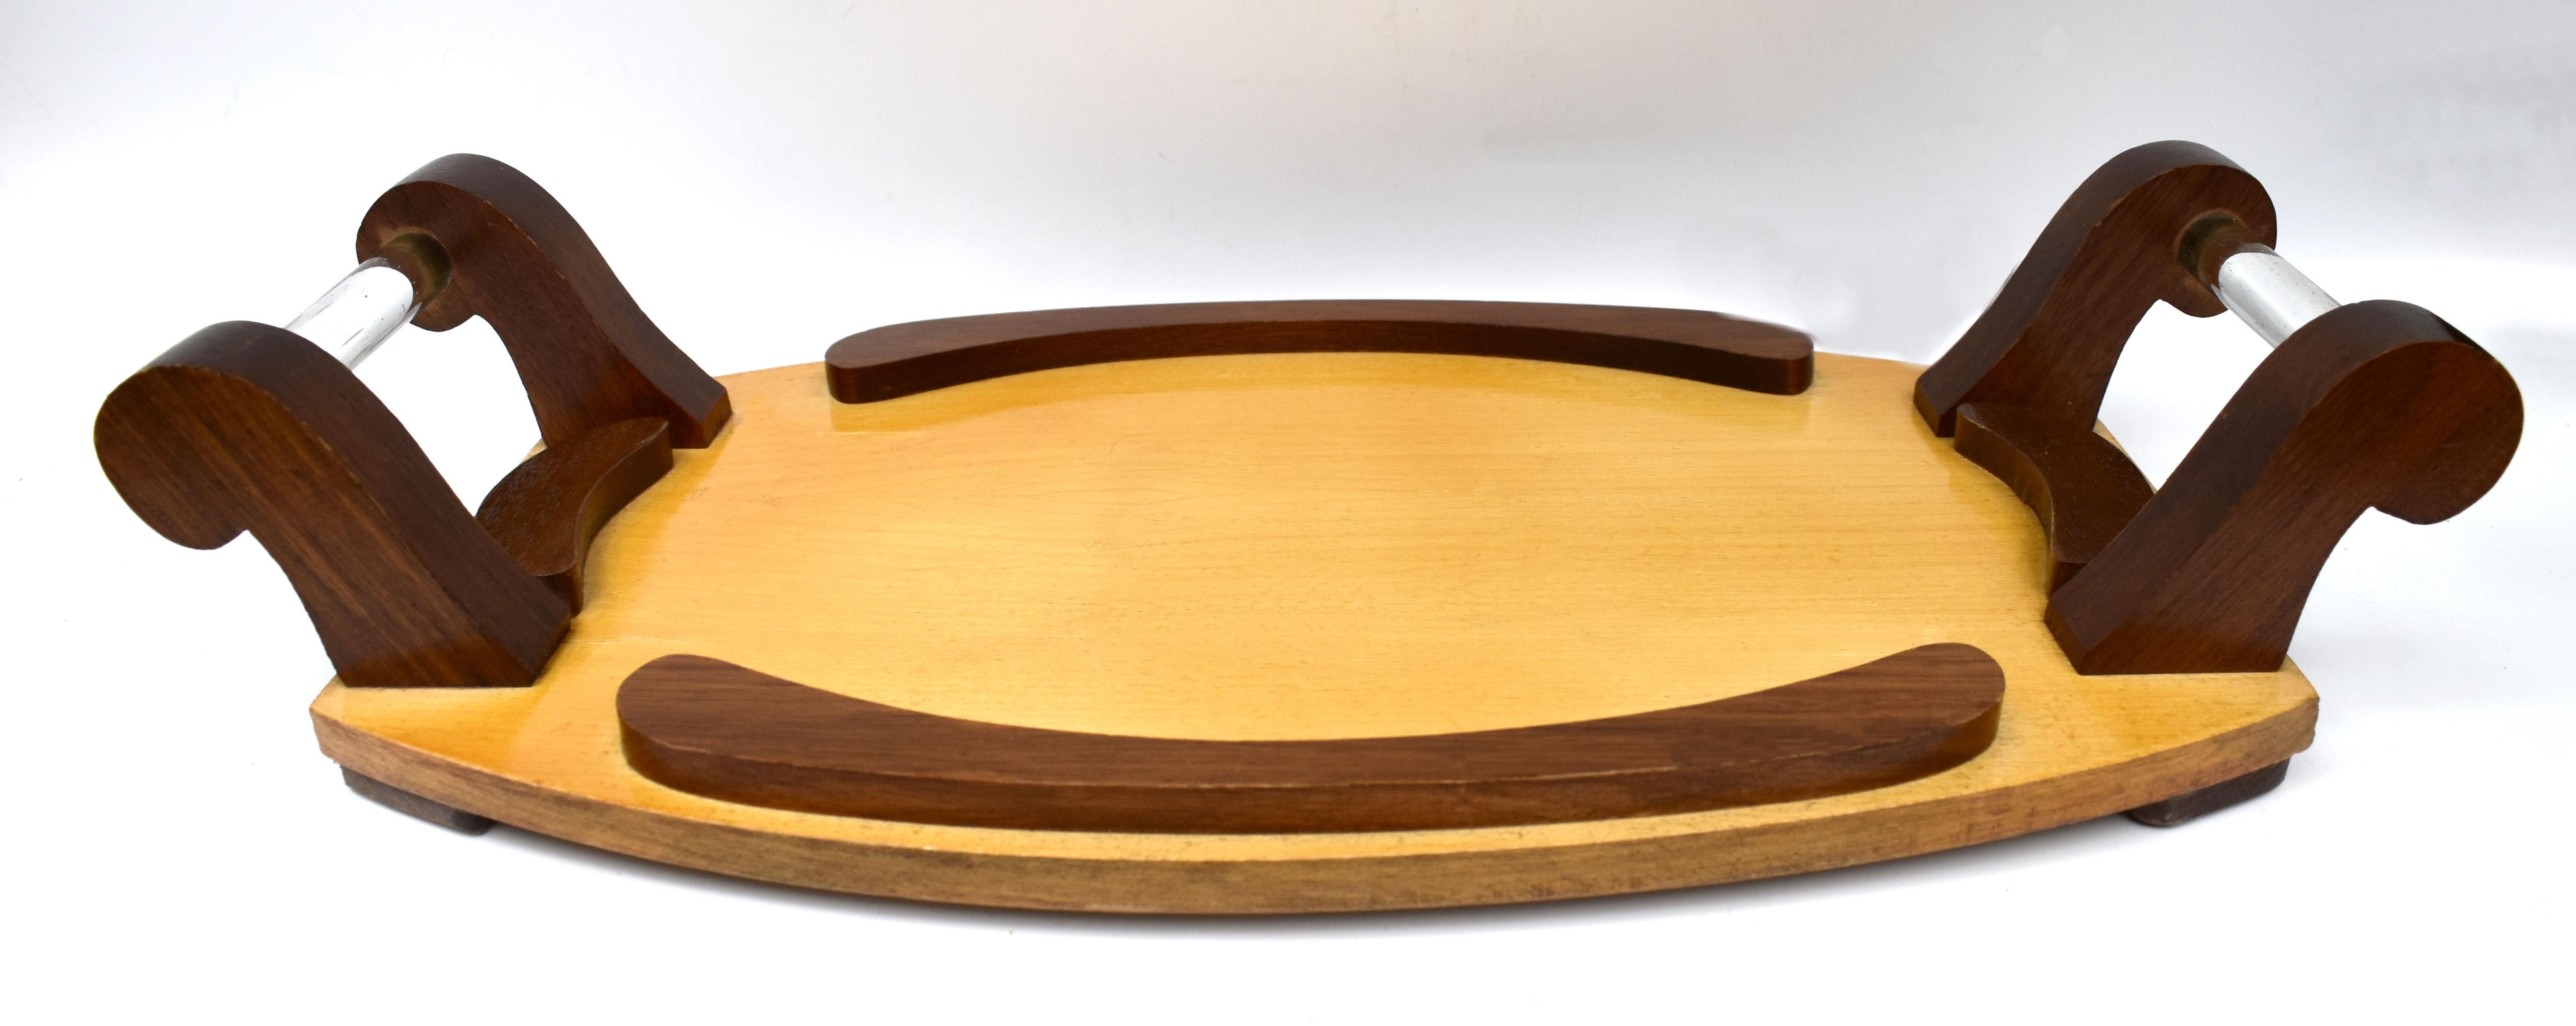 20th Century Art Deco Modernist French Serving Tray, French, c1930 For Sale